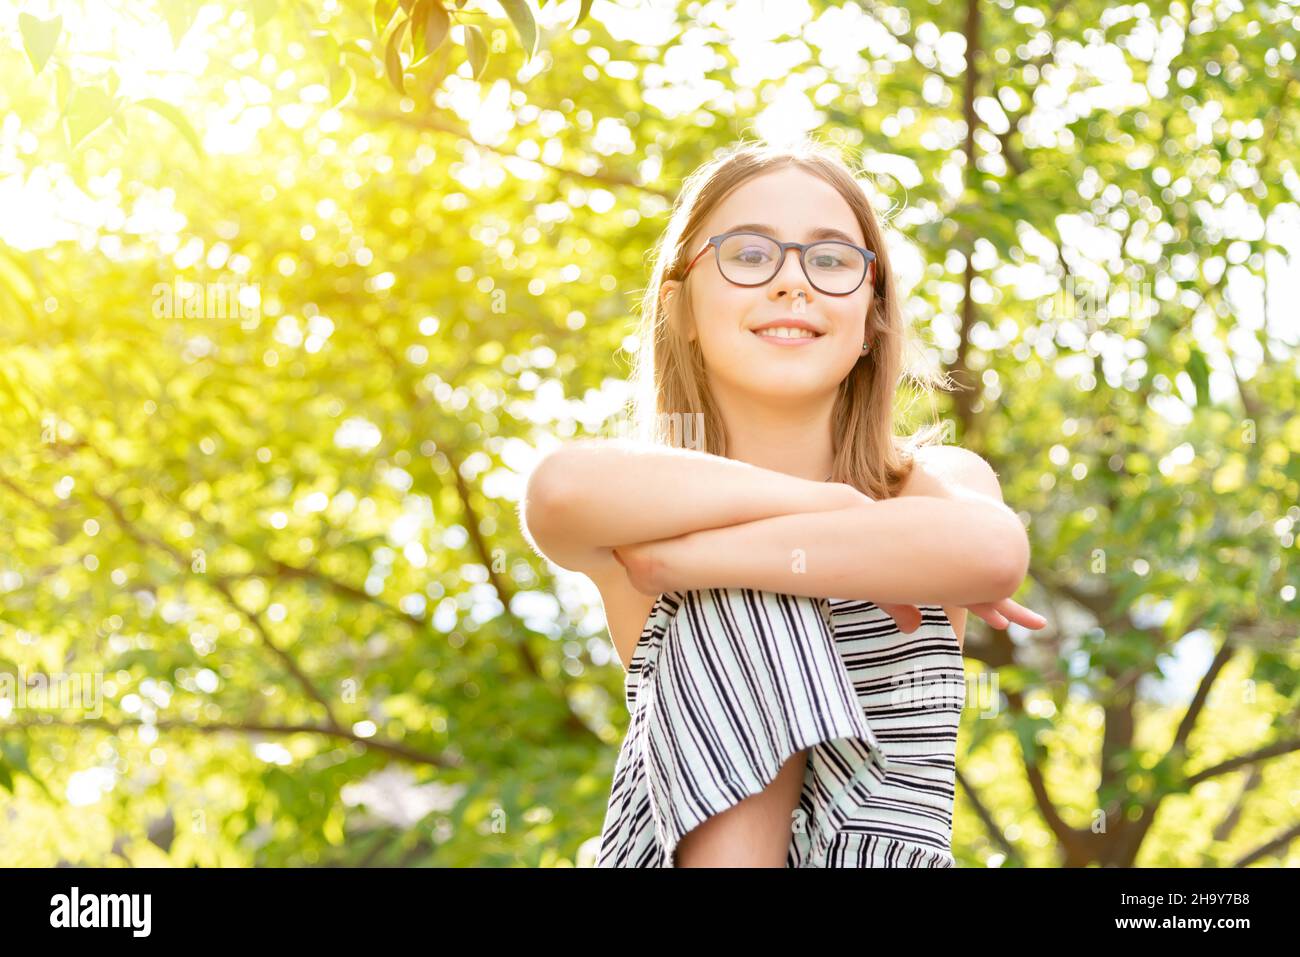 Portrait of a smiling girl wearing glasses with her arms crossed over her knee on a sunny wooded background Stock Photo